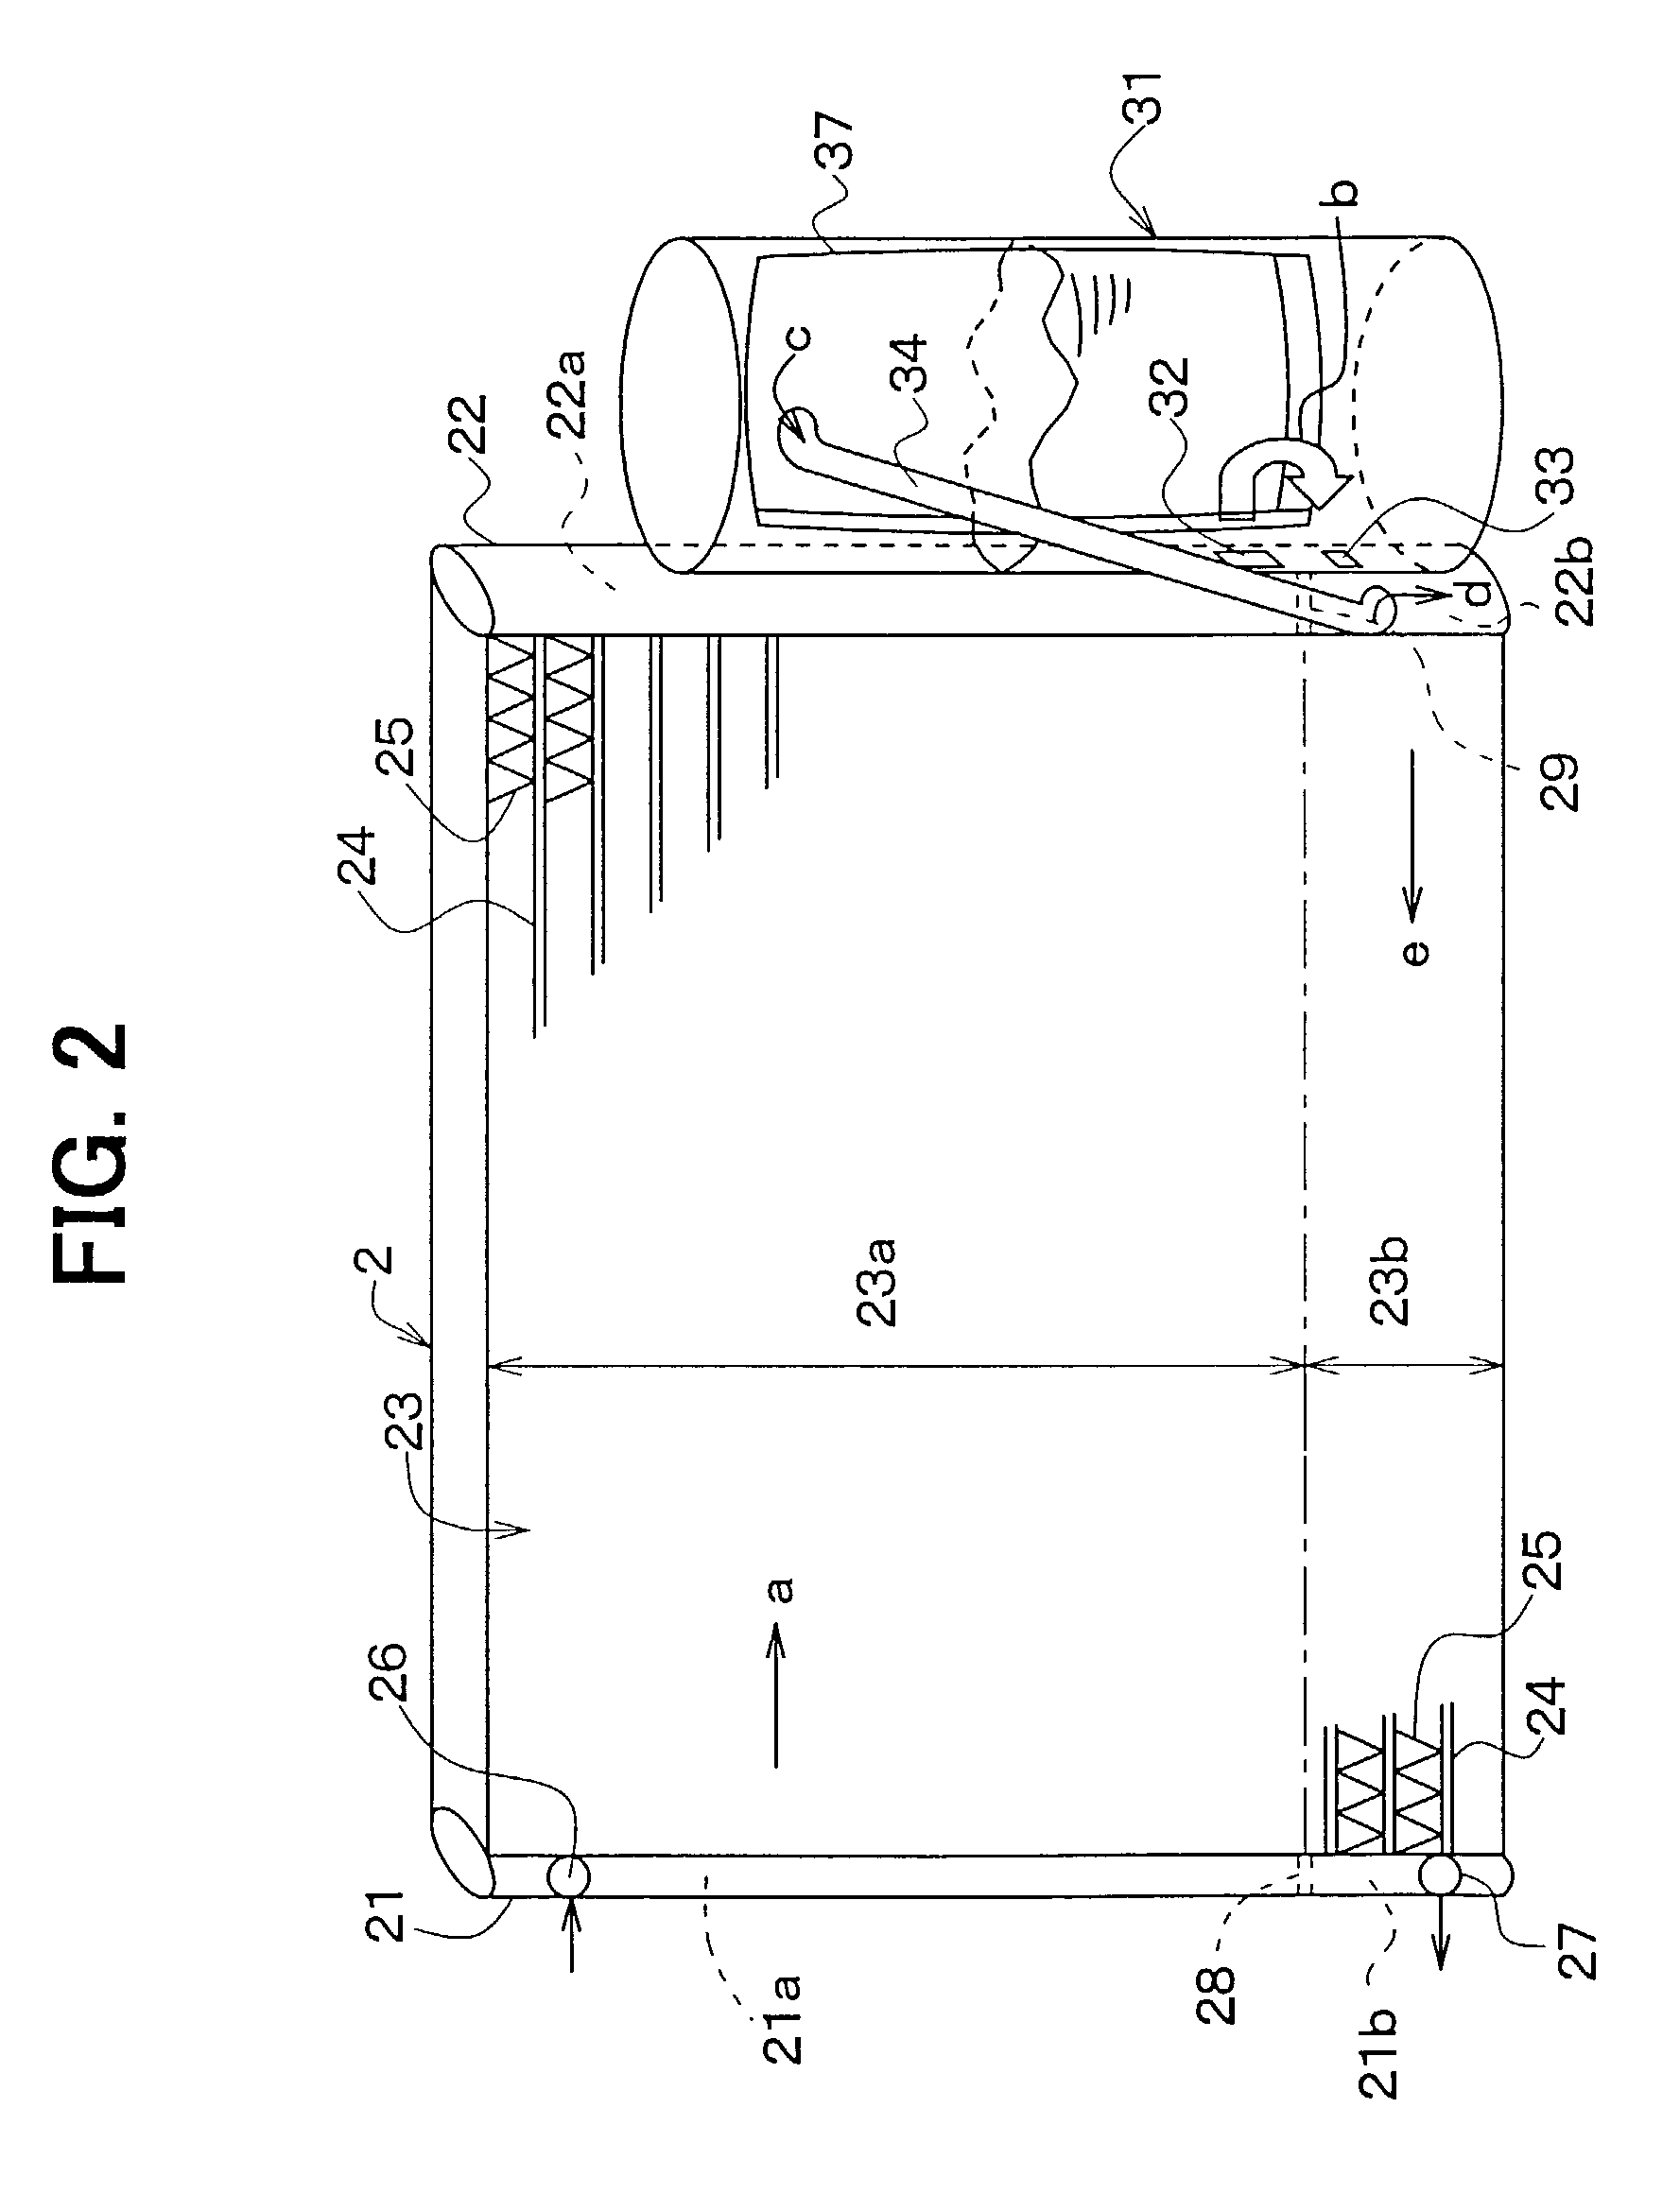 Refrigerant cycle system having discharge function of gas refrigerant in receiver